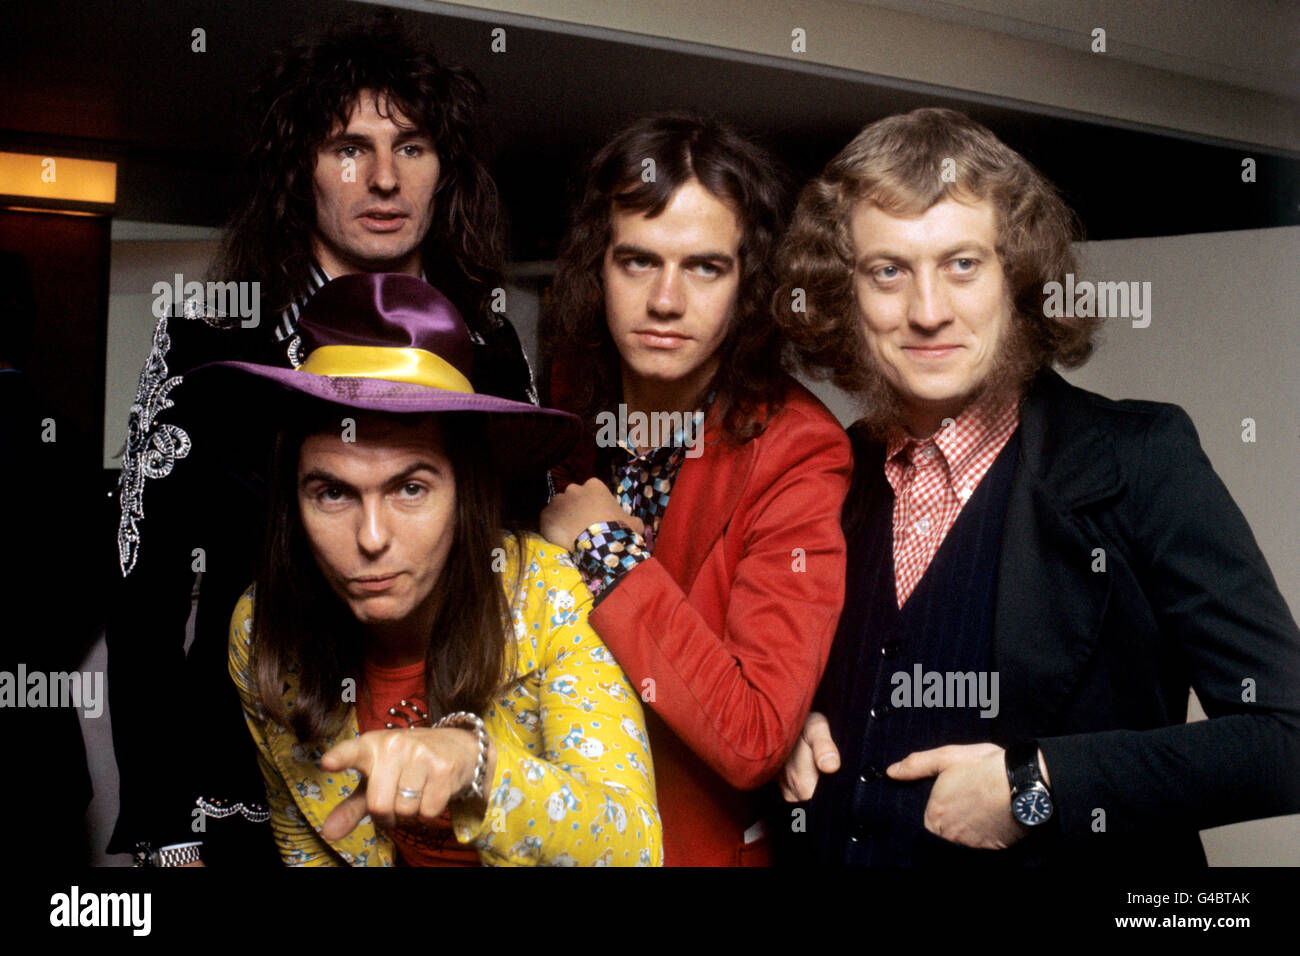 The Slade pop group at the Savoy Hotel in London for the Melody Maker Awards ceremony. Stock Photo